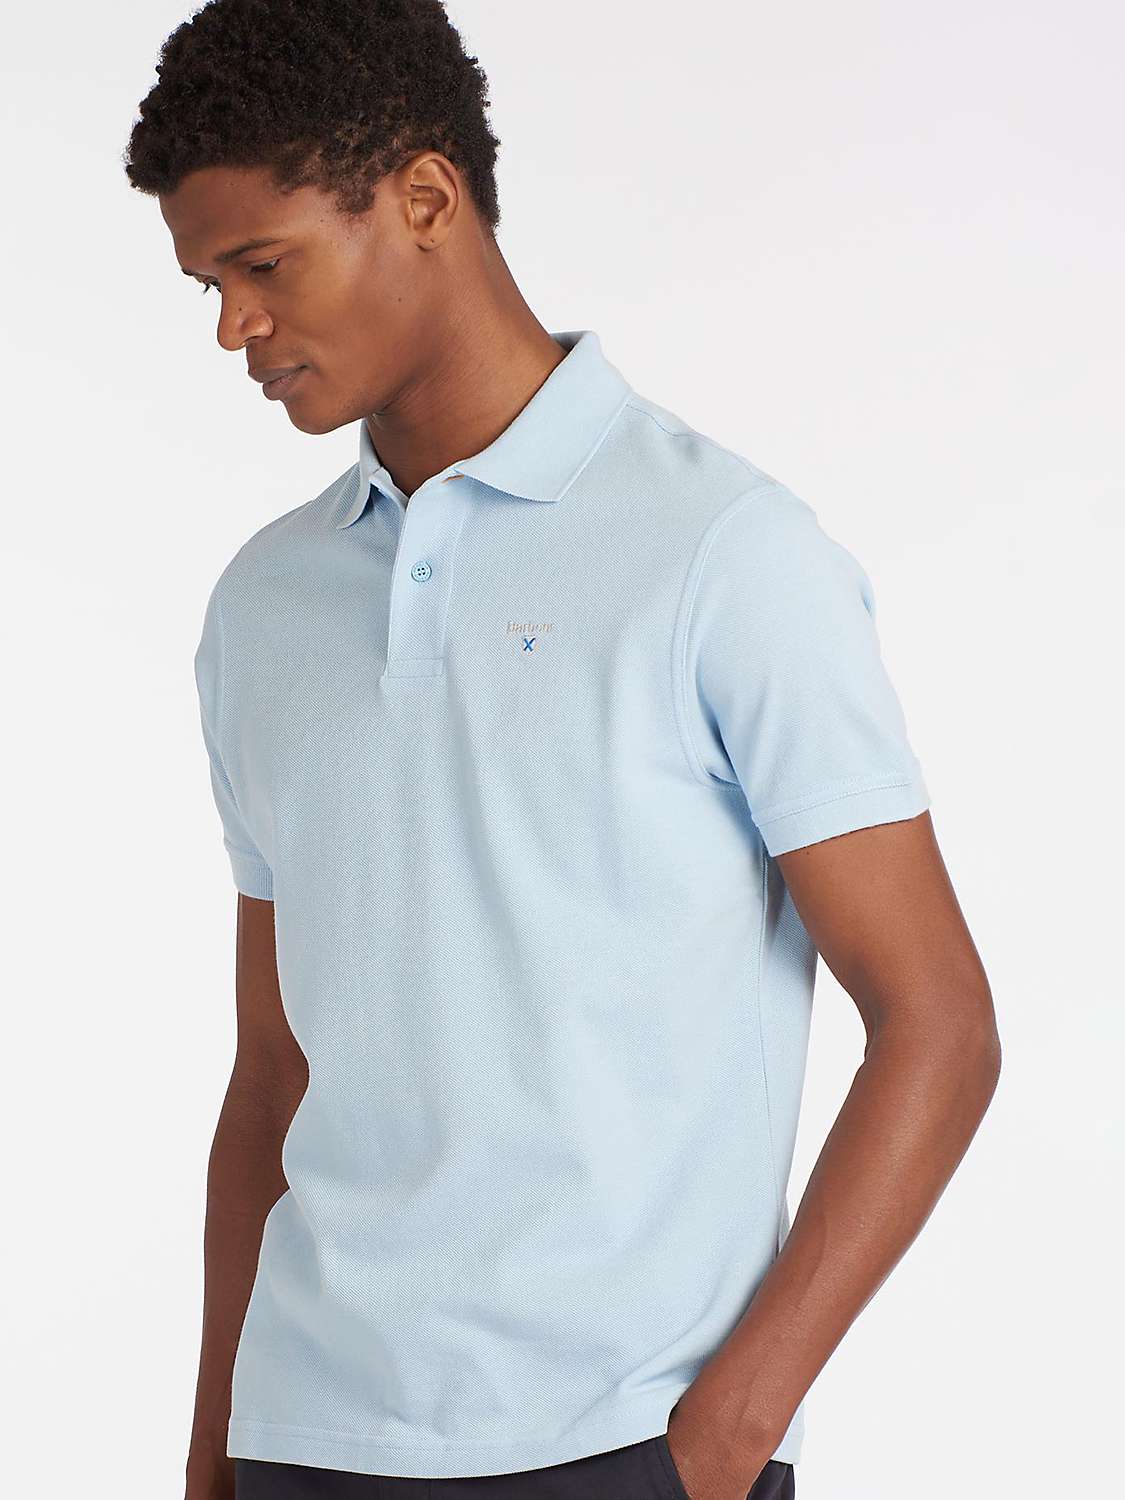 Buy Barbour Short Sleeve Sports Polo Shirt, Sky Online at johnlewis.com